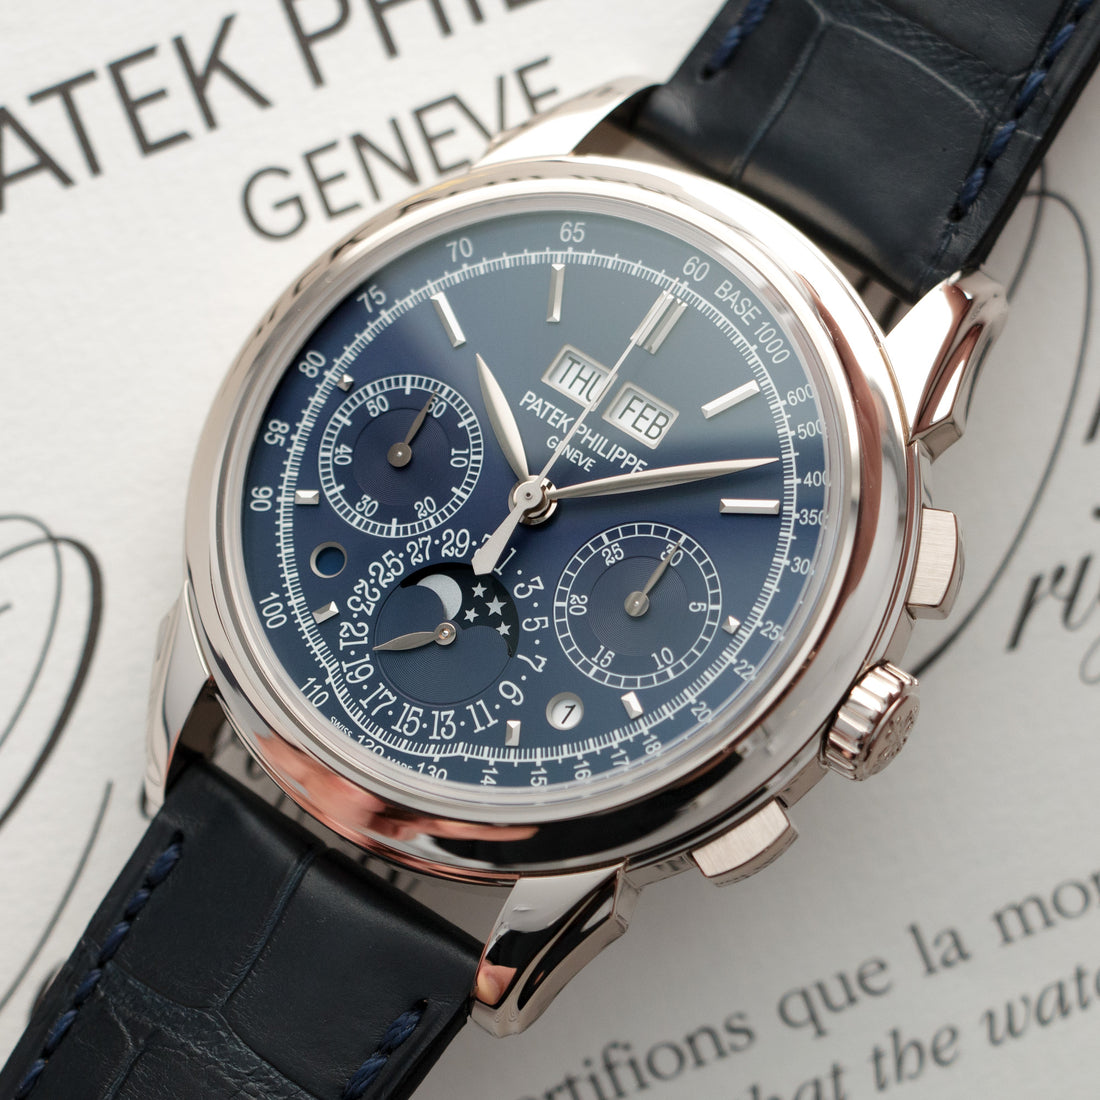 Patek Philippe White Gold Perpetual Chronograph Watch Ref. 5270